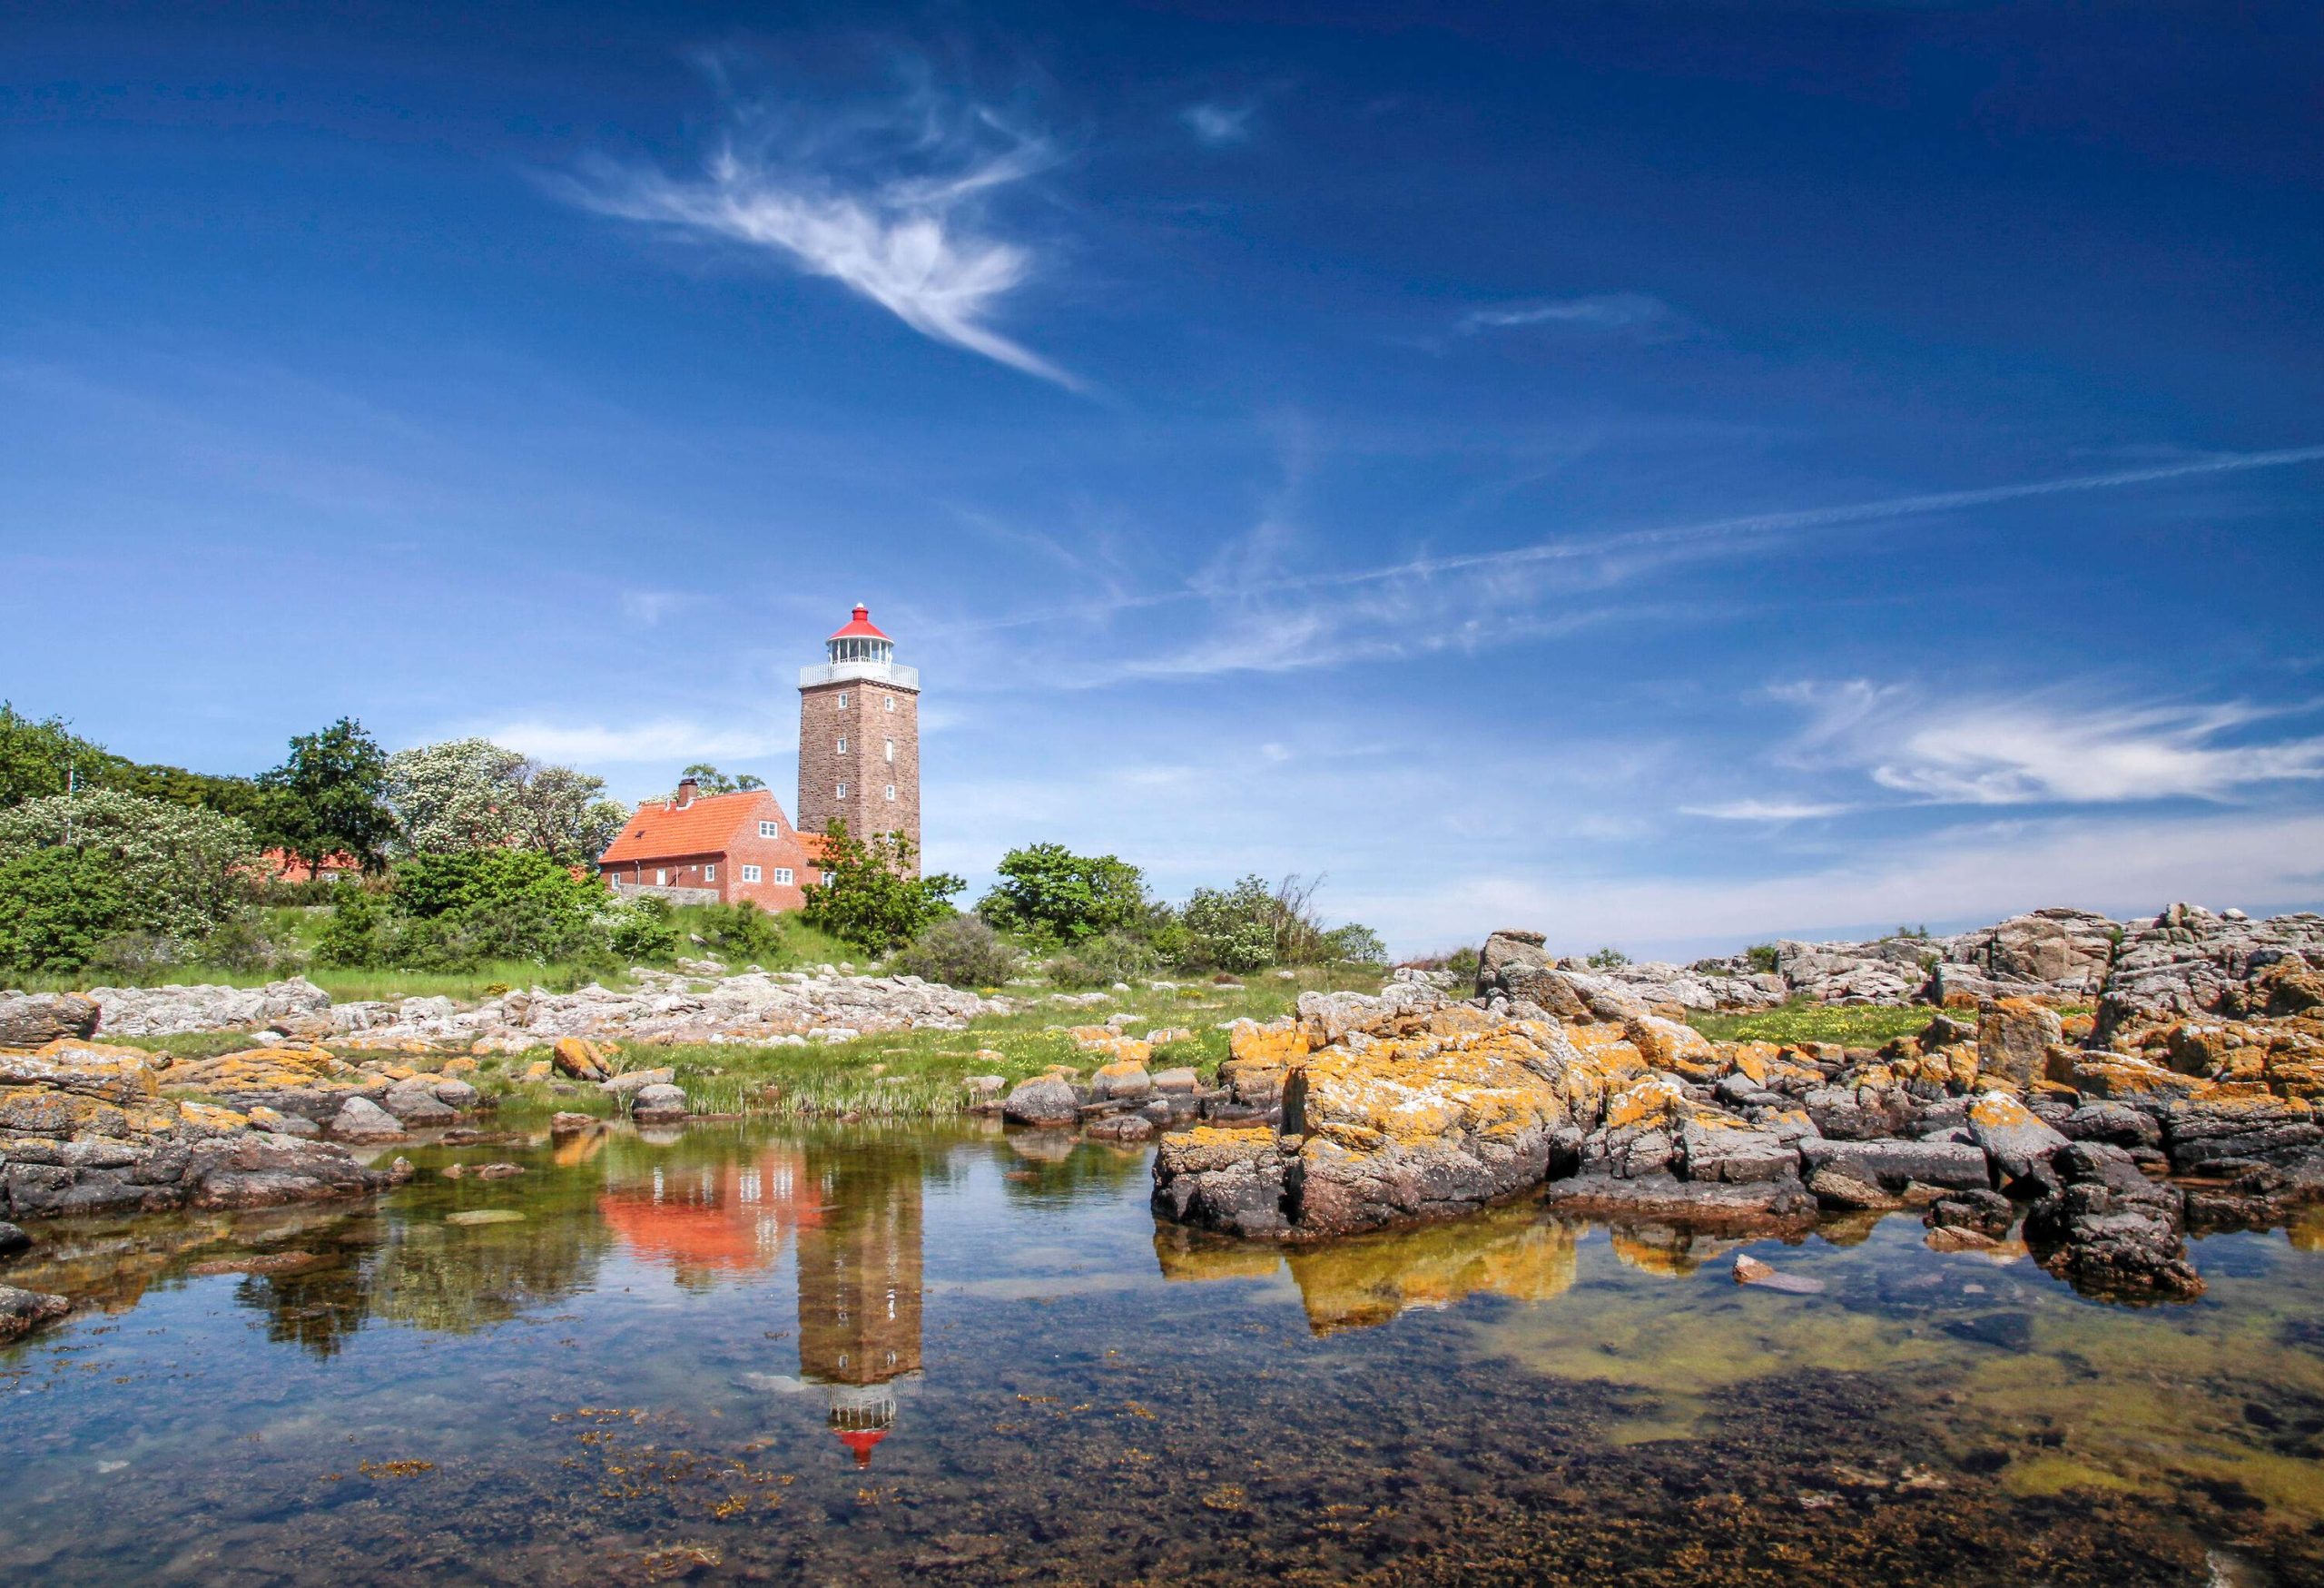 A square-shaped lighthouse and keeper's house reflecting on shallow waters with a rocky shore.